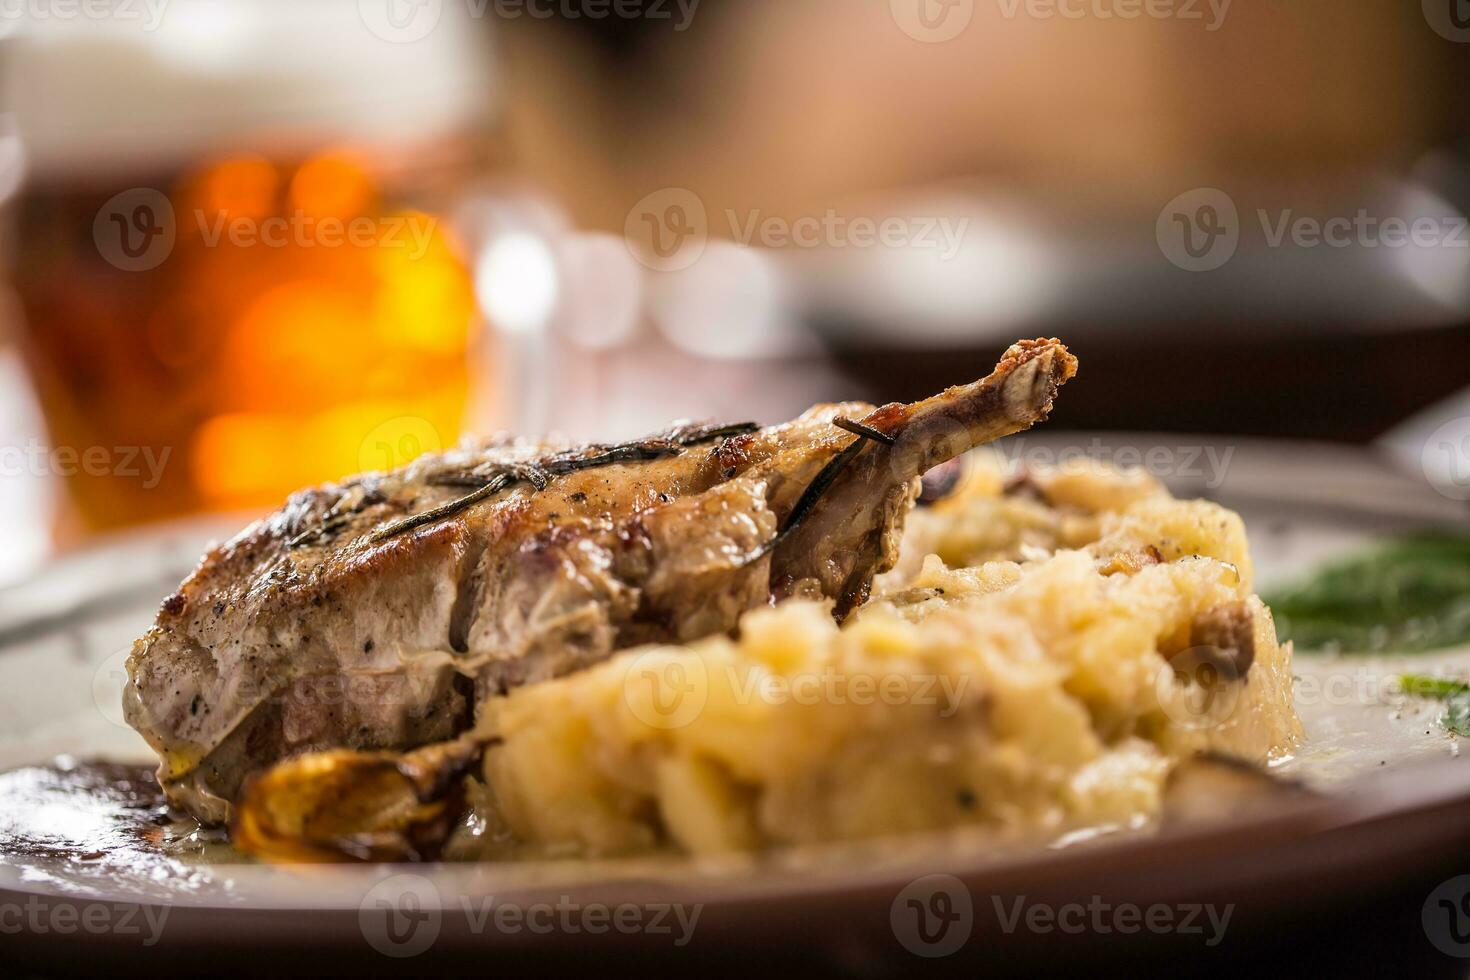 Iberian cutlet with mashes potatoes decoration and draft beere in pub or restaurant photo